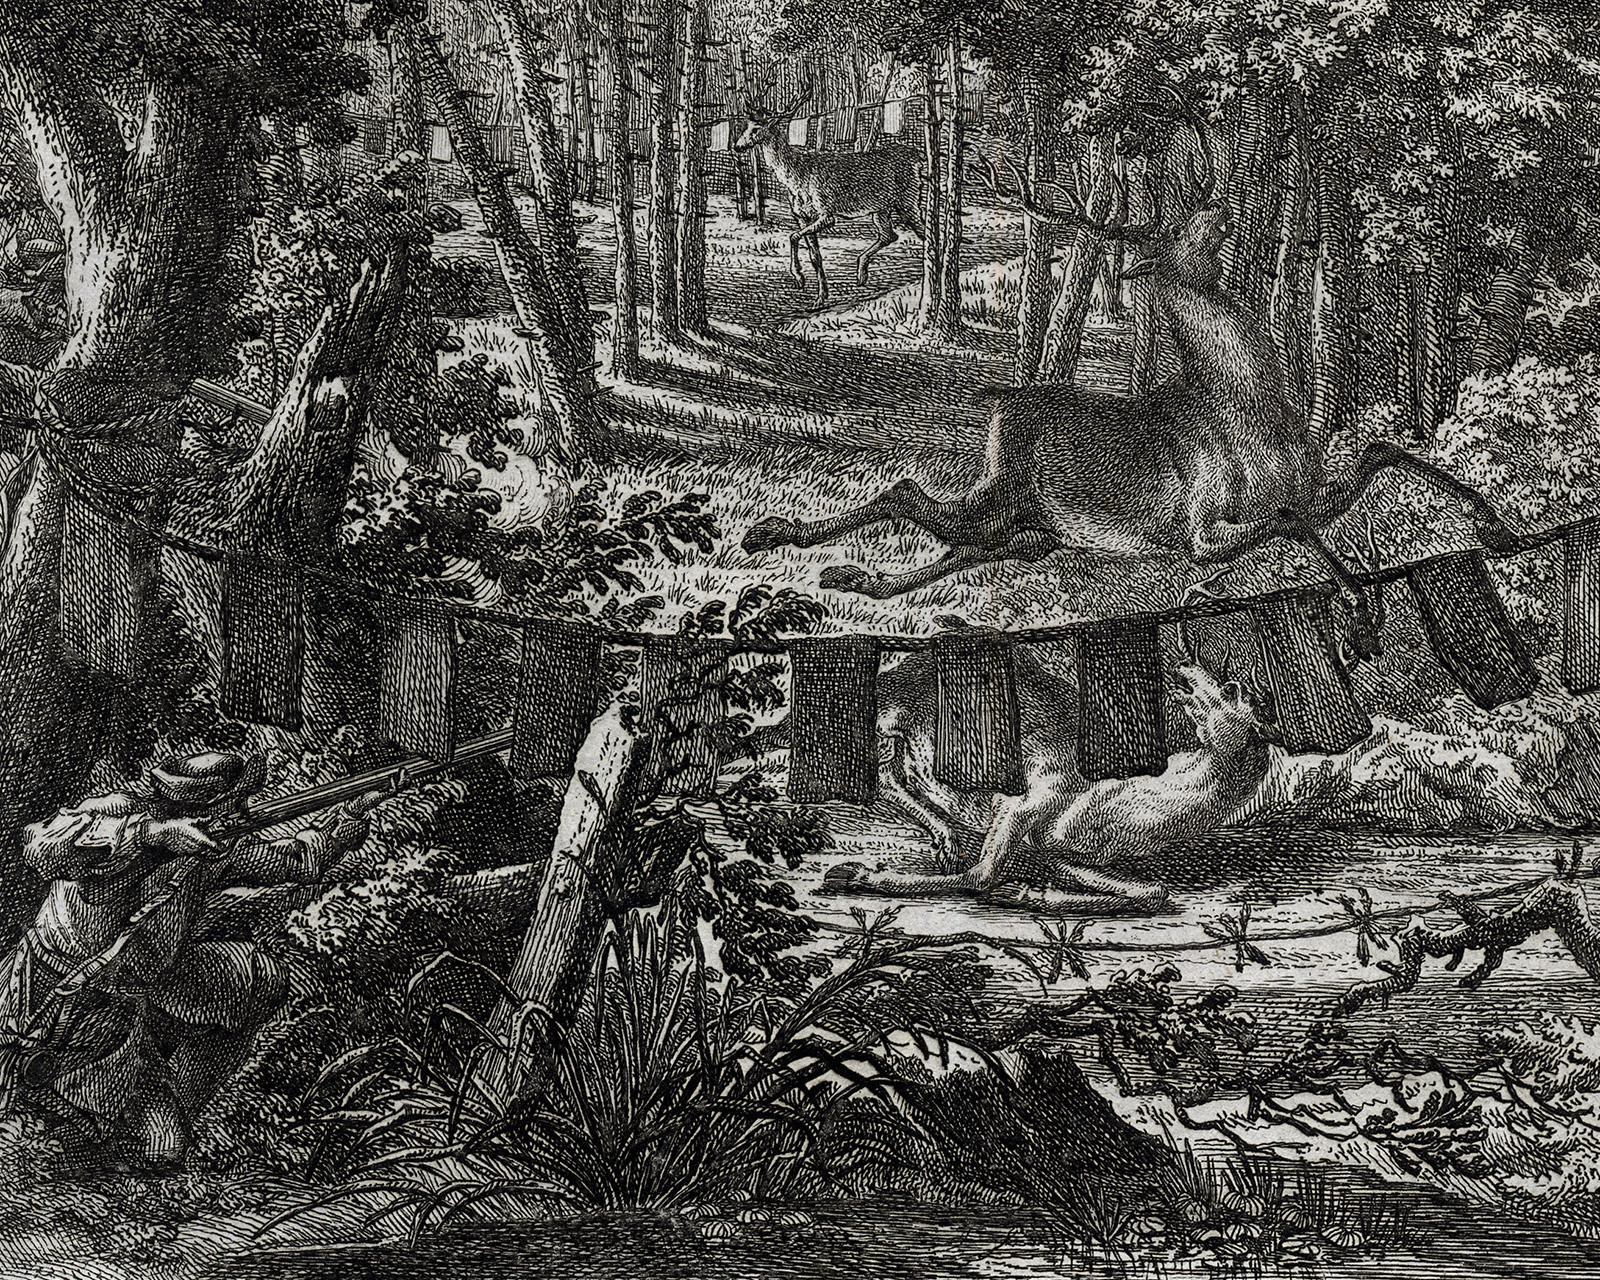 Antique hunting scene print with a deer trap by Ridinger - Engraving - 18th c - Black Landscape Print by Martin Elias Ridinger